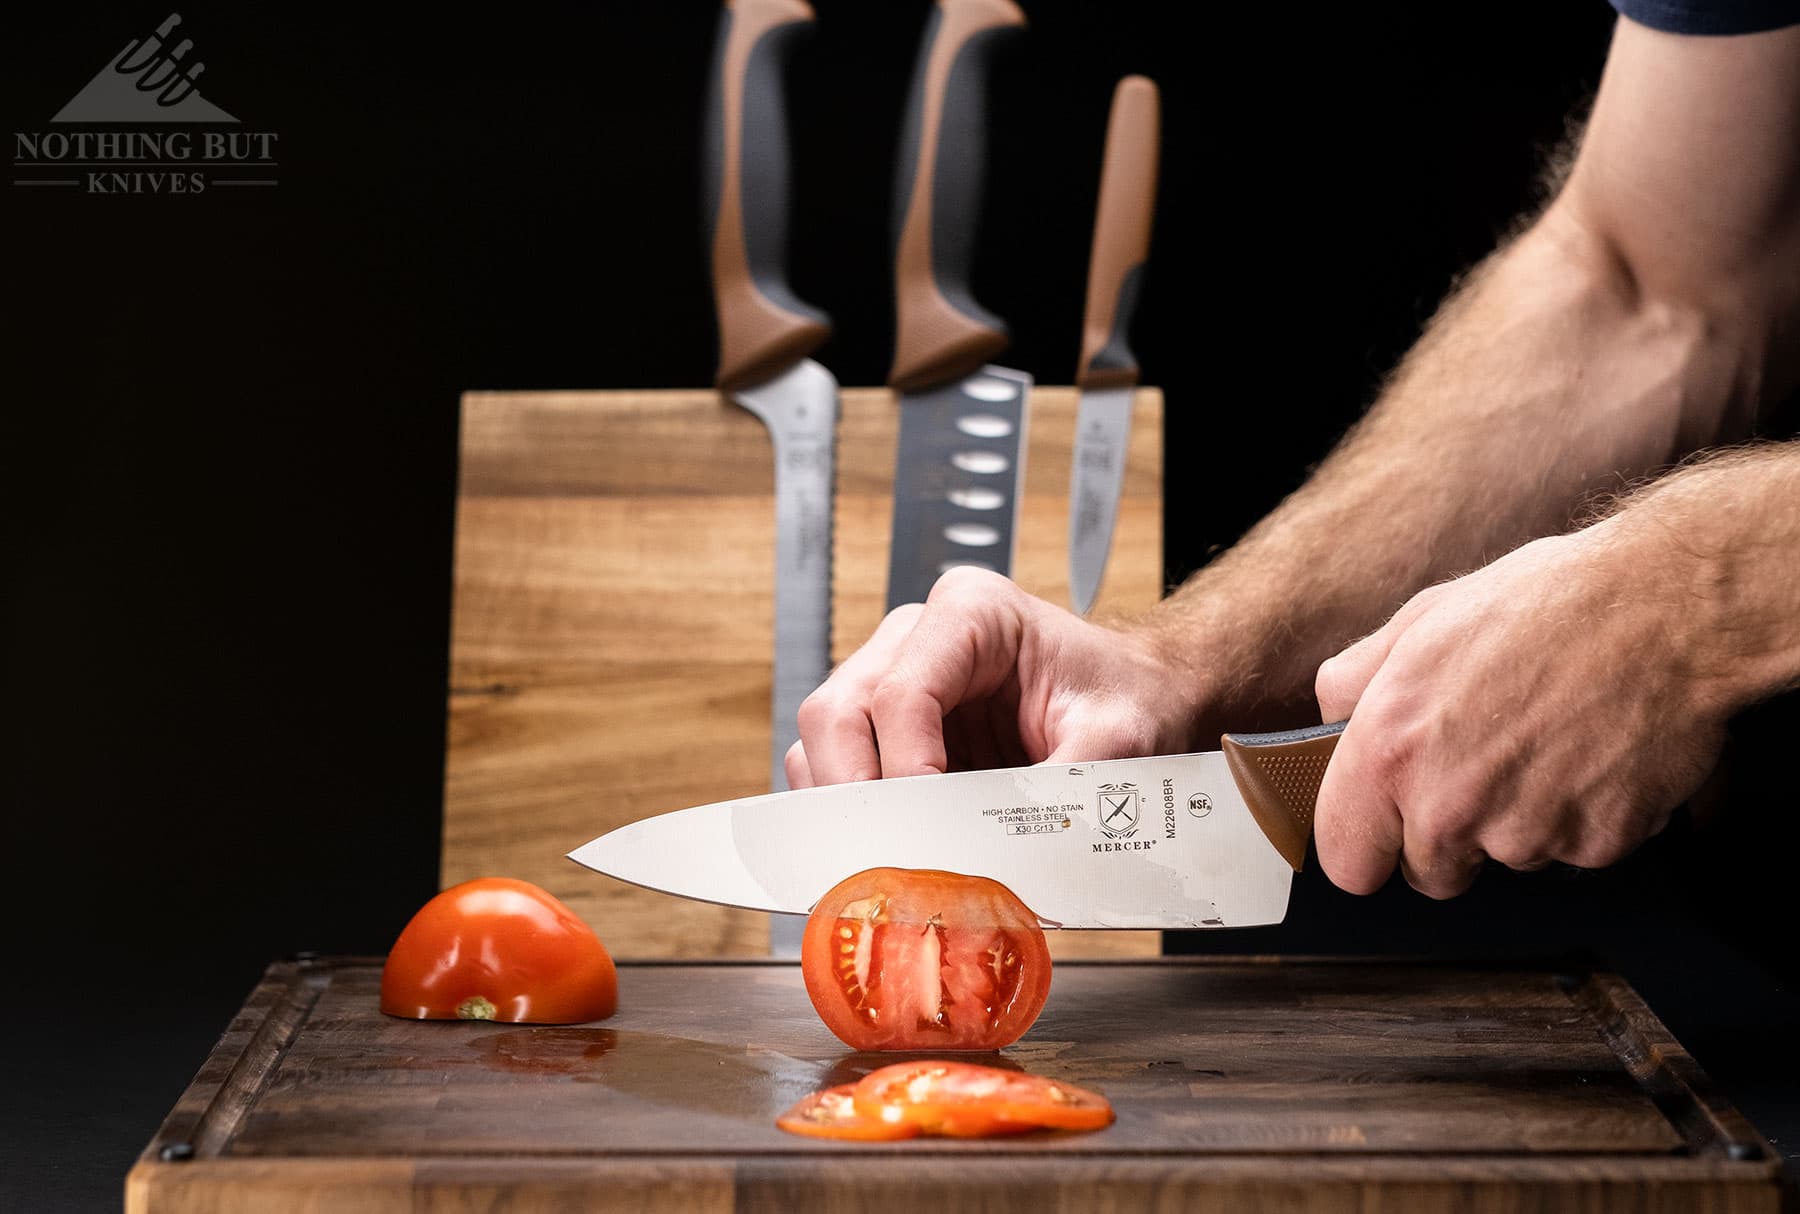 The Mercer Millennia chef's knife cutting a thin slice off a tomato.